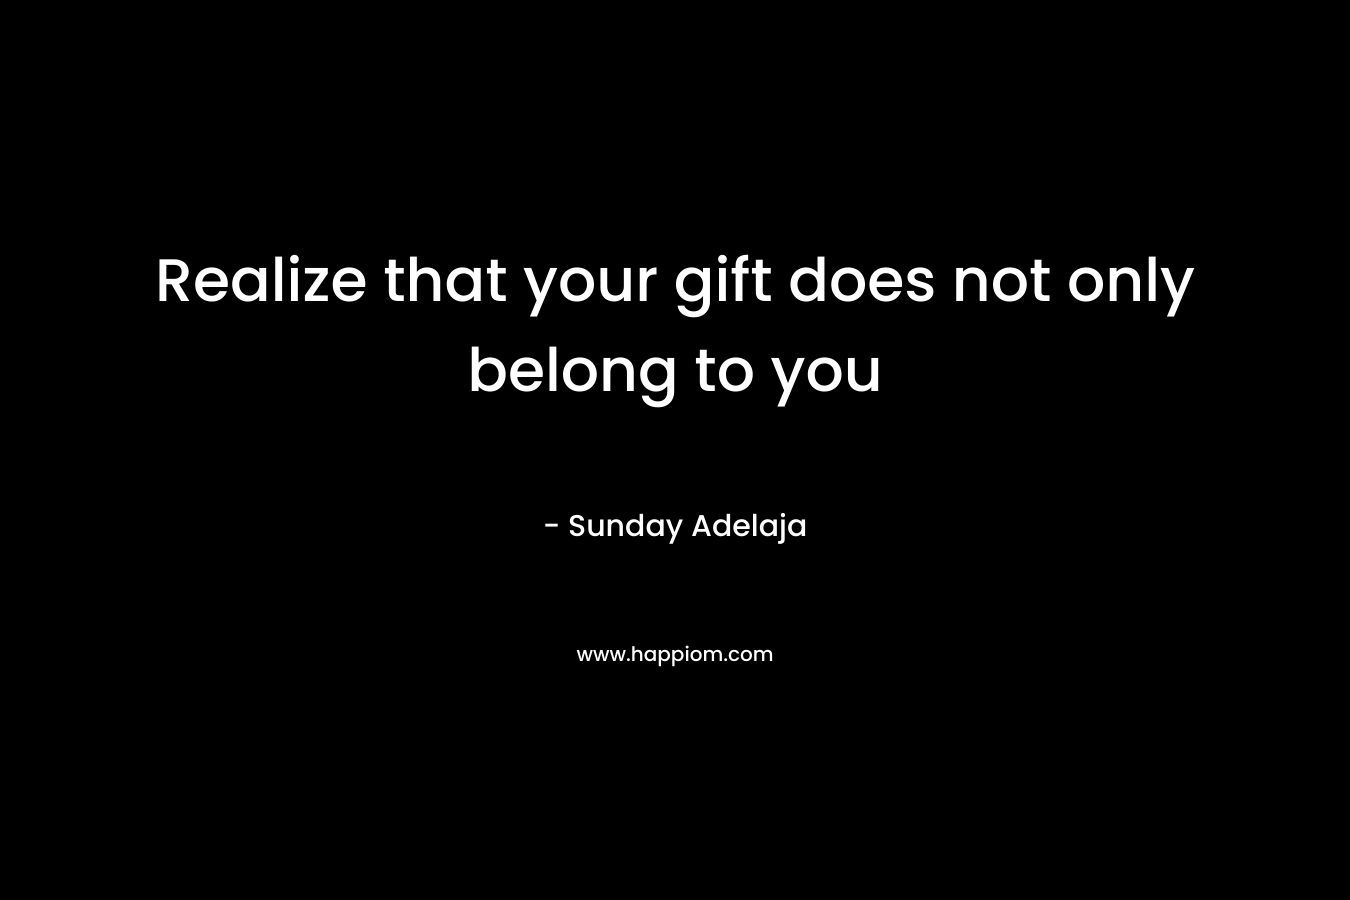 Realize that your gift does not only belong to you